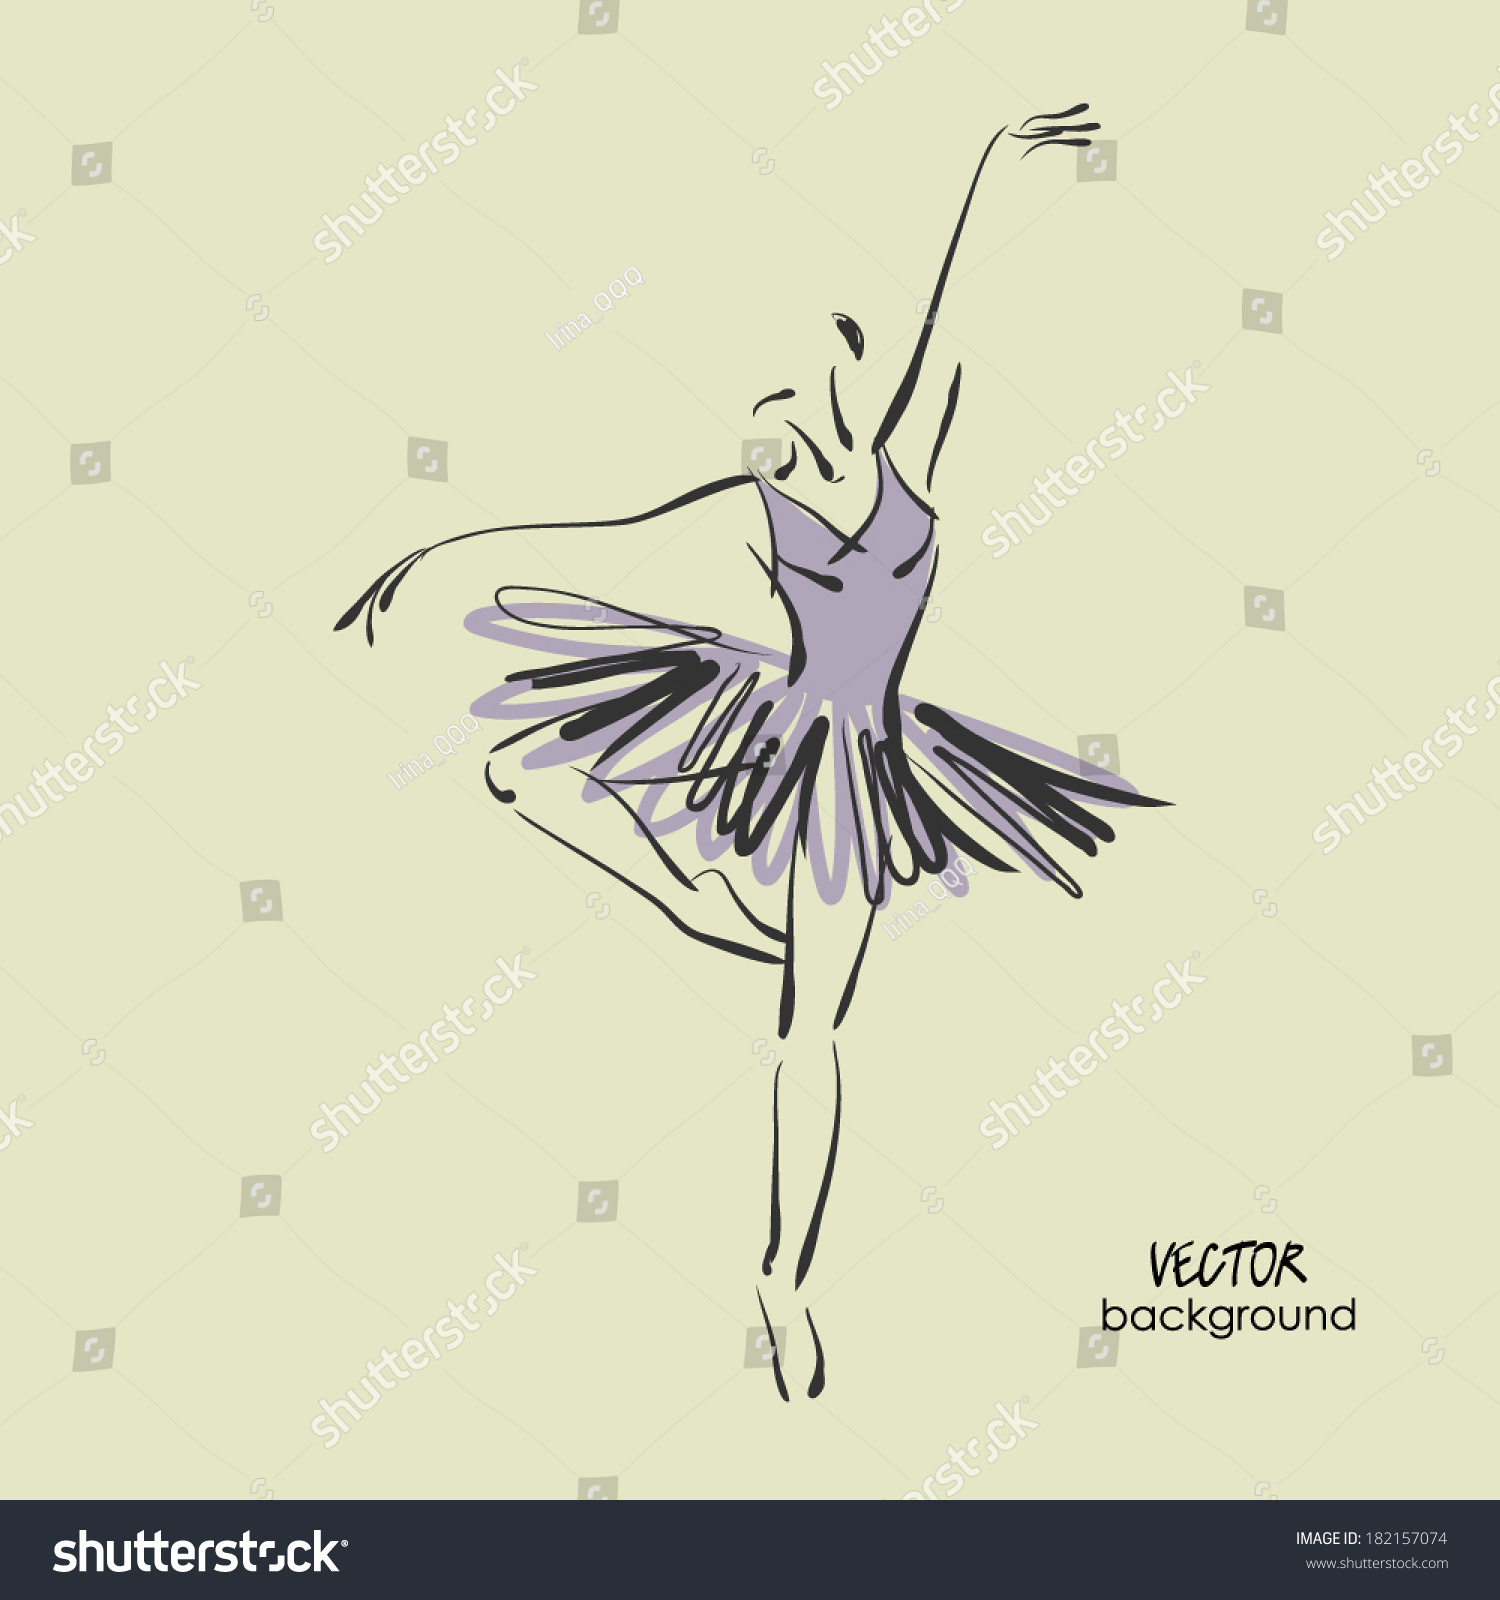 Sketched Beautiful Young Tutu Stock Vector (Royalty 182157074